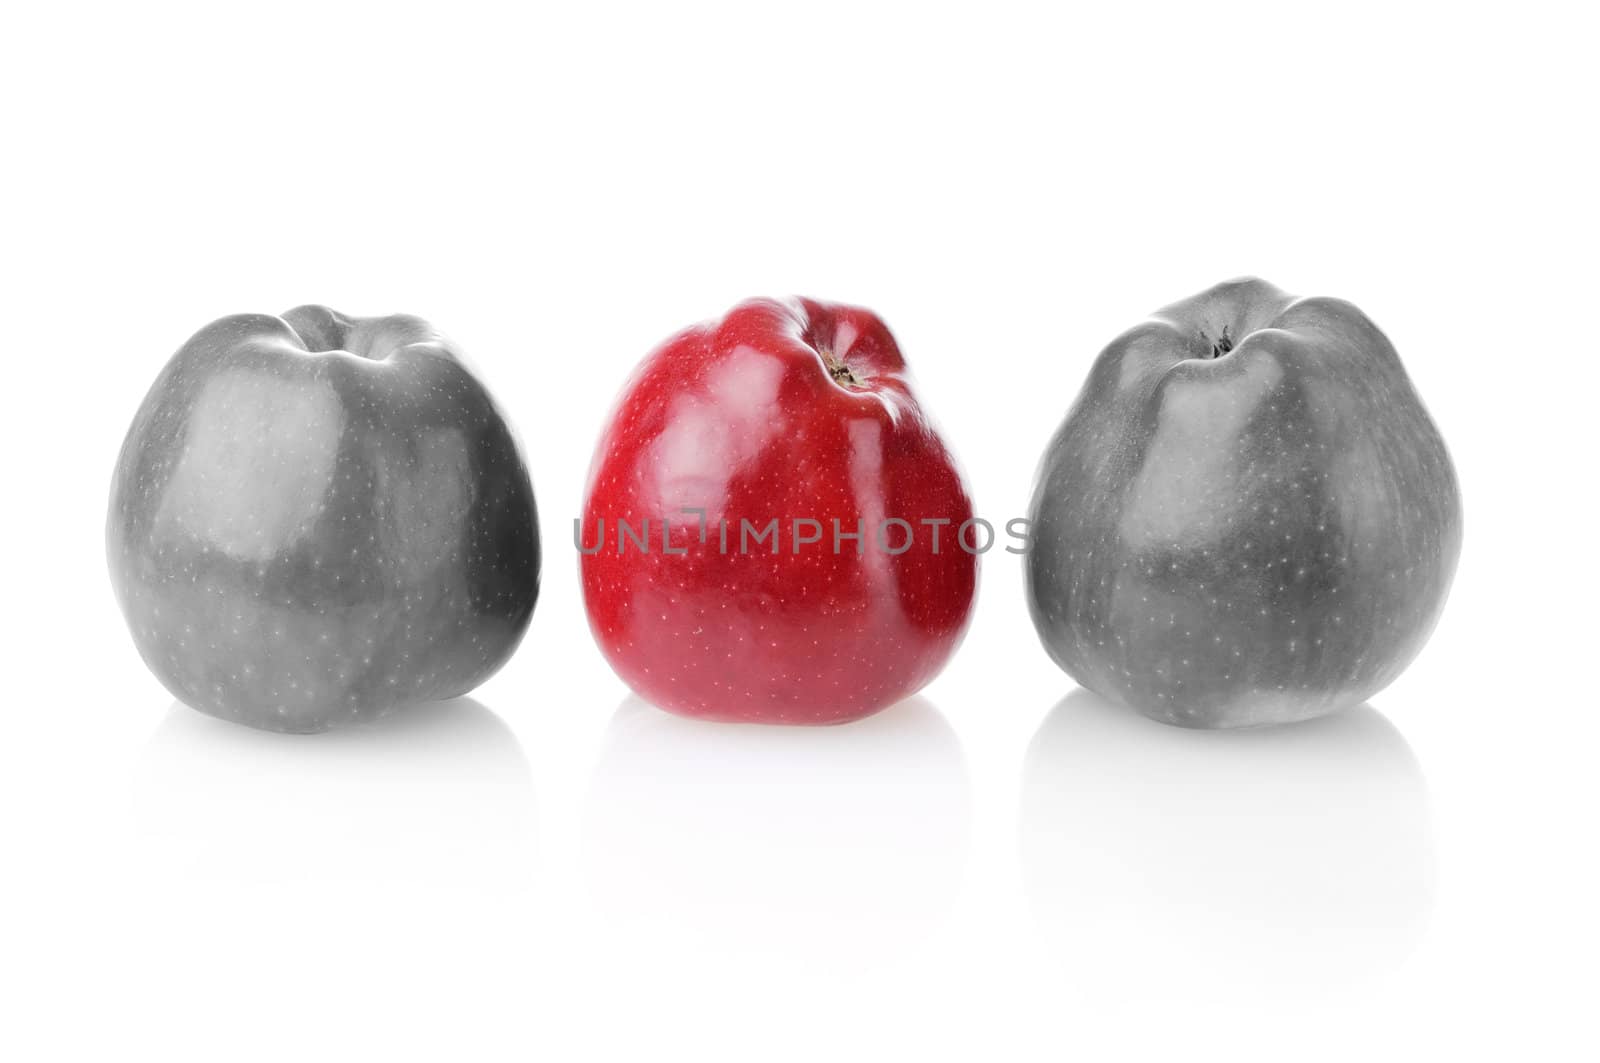 Different bright red apple between two colourless apples on white background